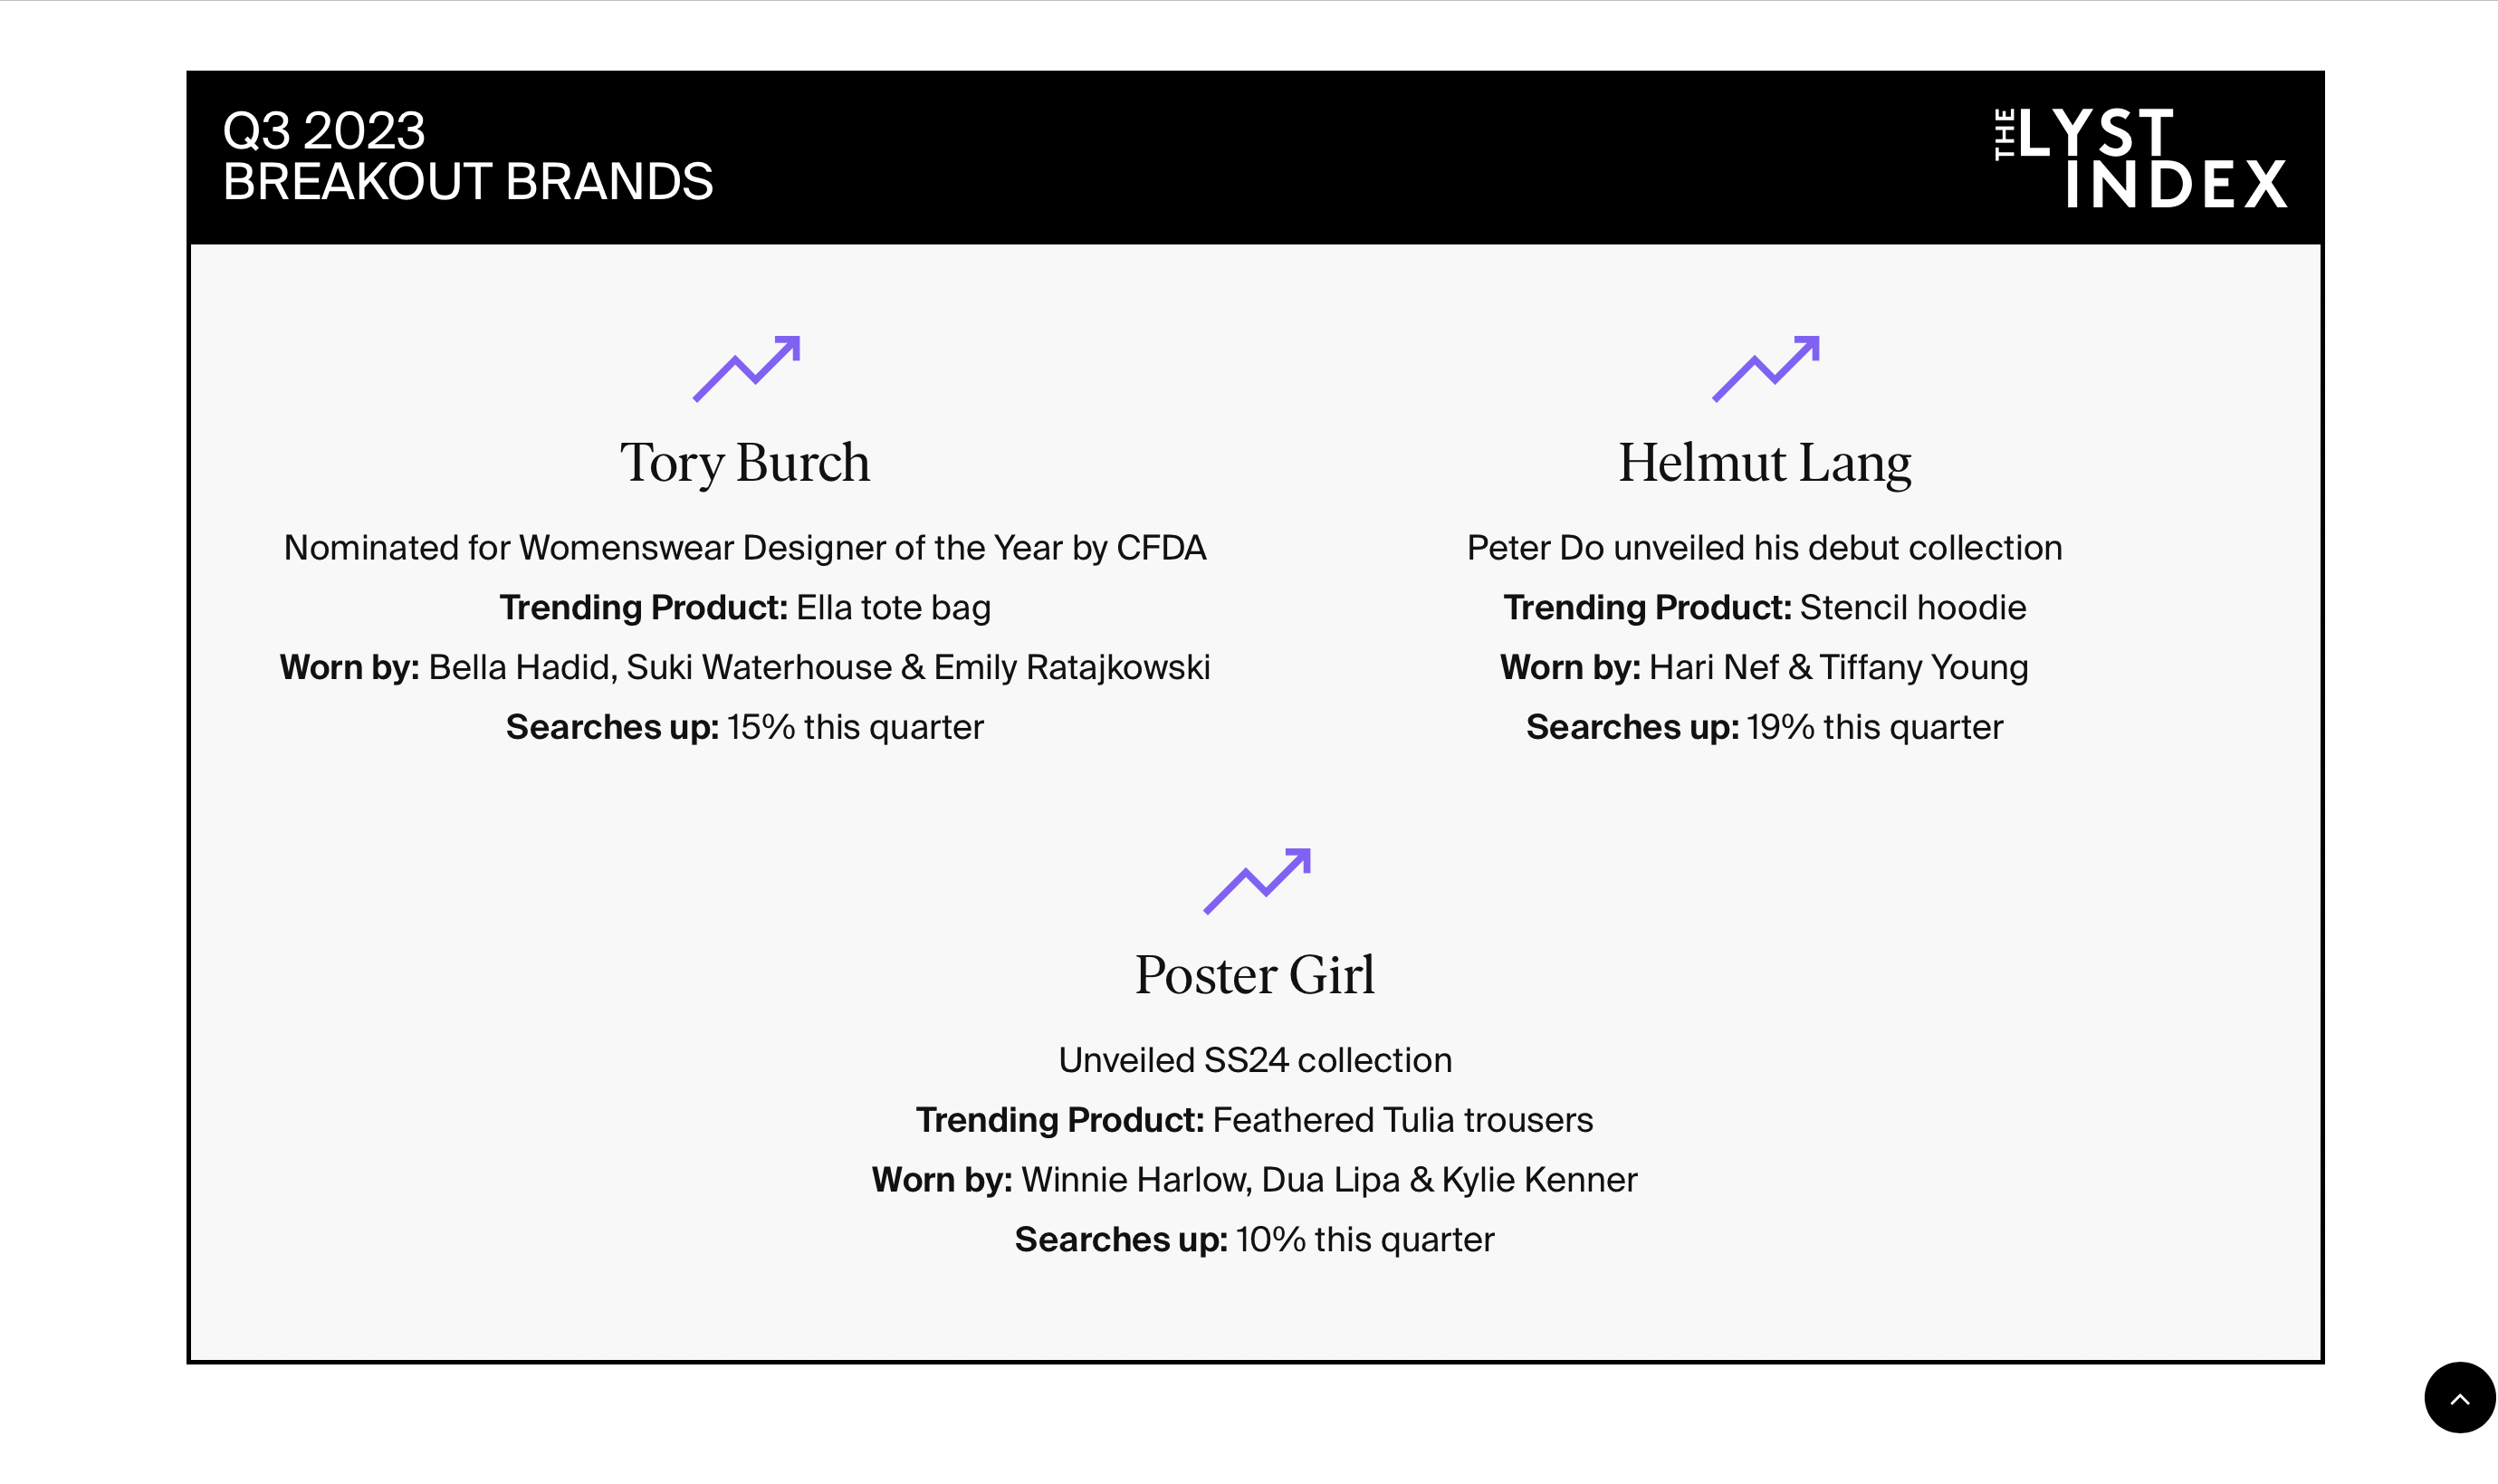 How Tory Burch Measures Up Against Her Competitors